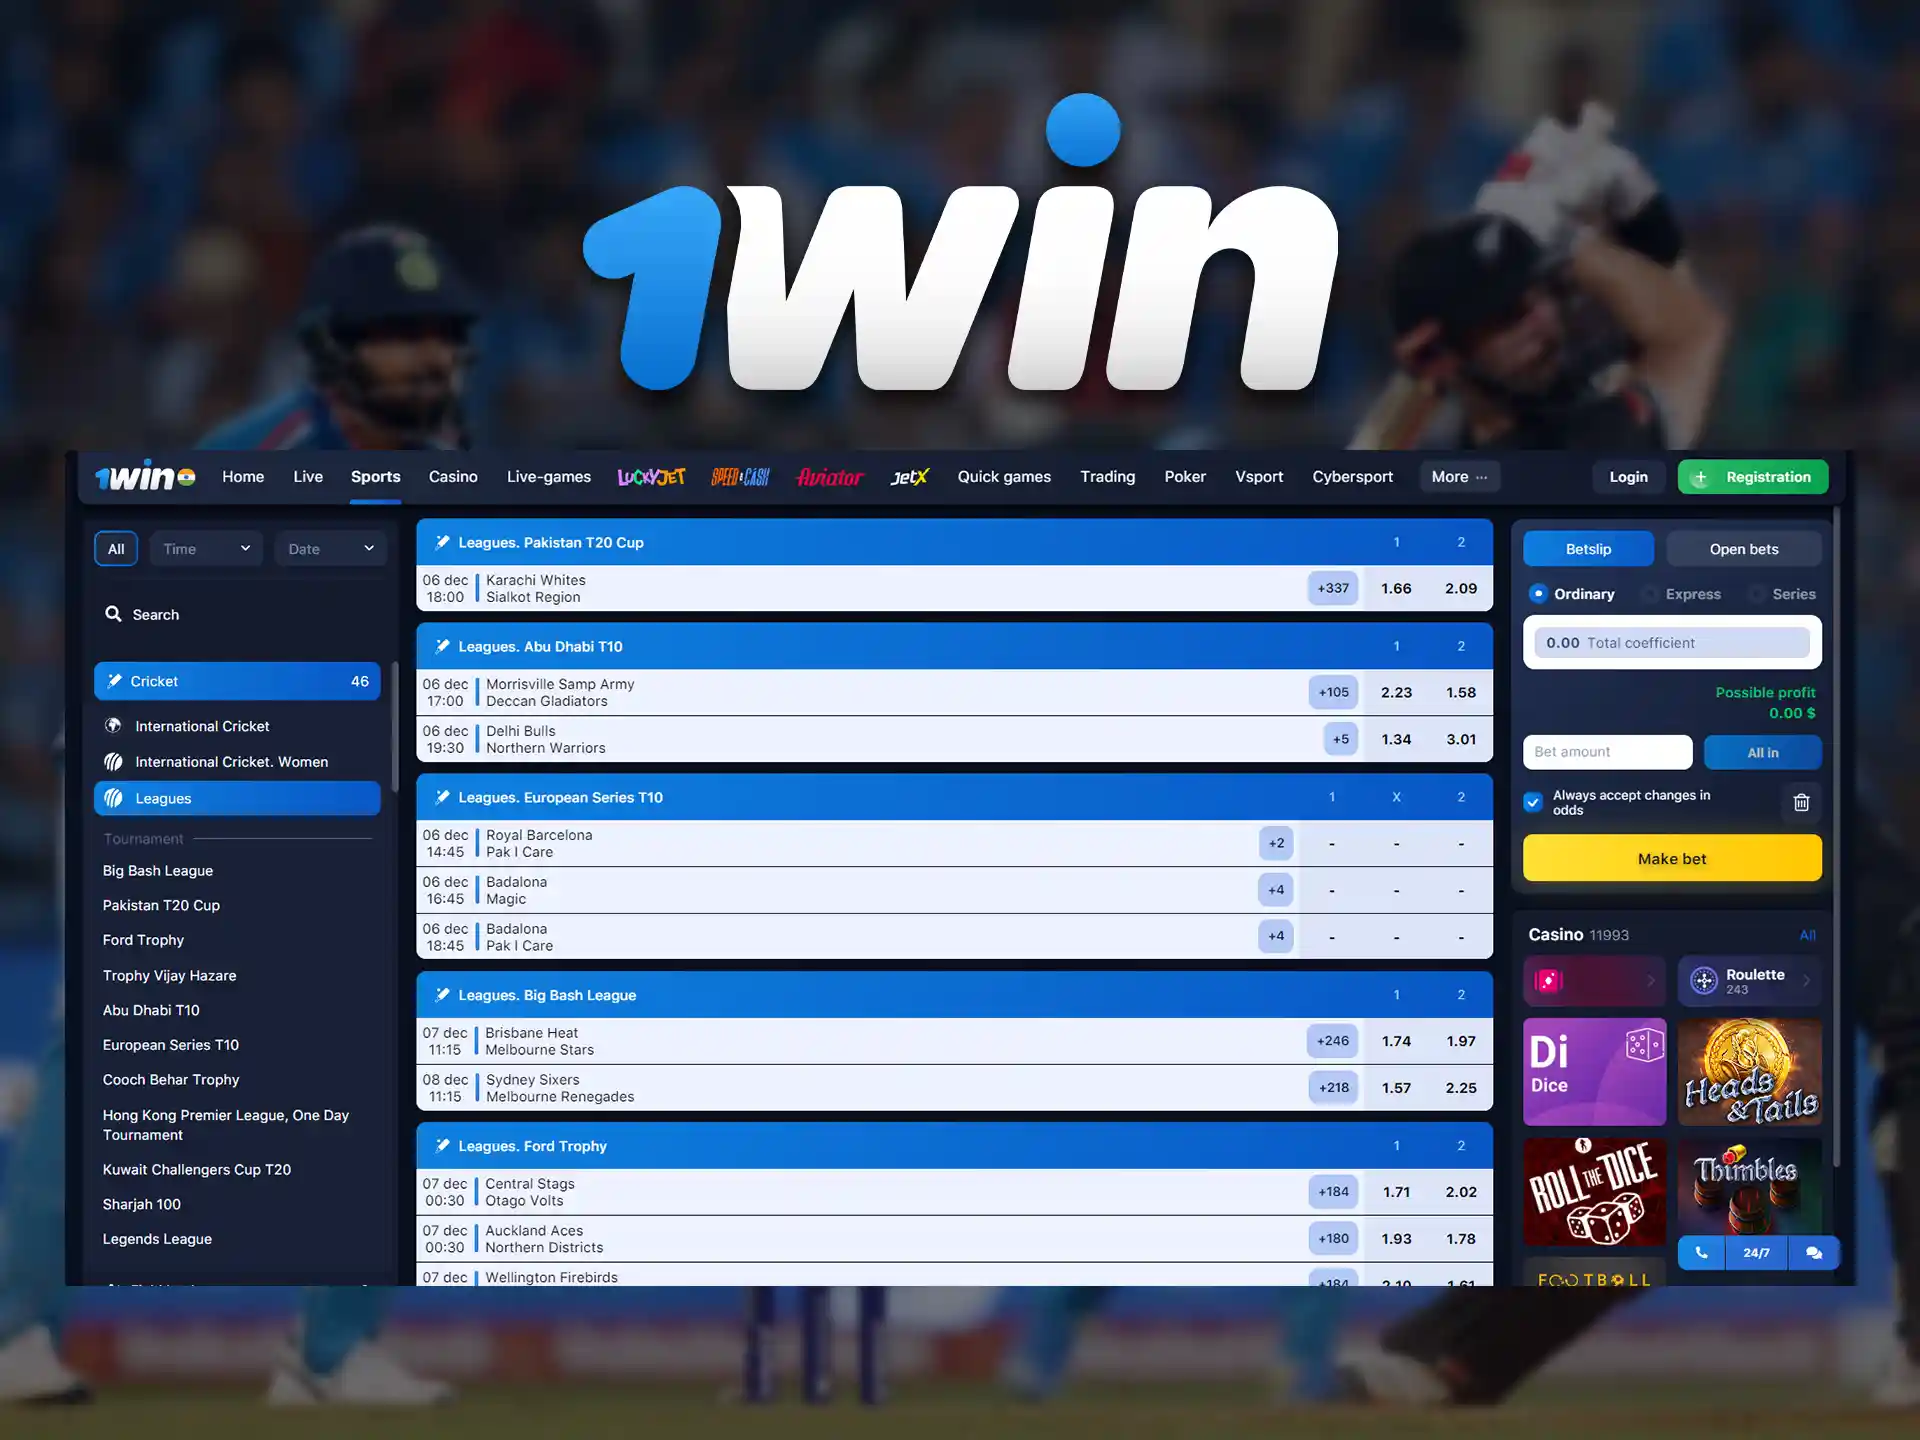 Cricket betting and a welcome bonus of 500% up to INR 80,400 at 1Win.